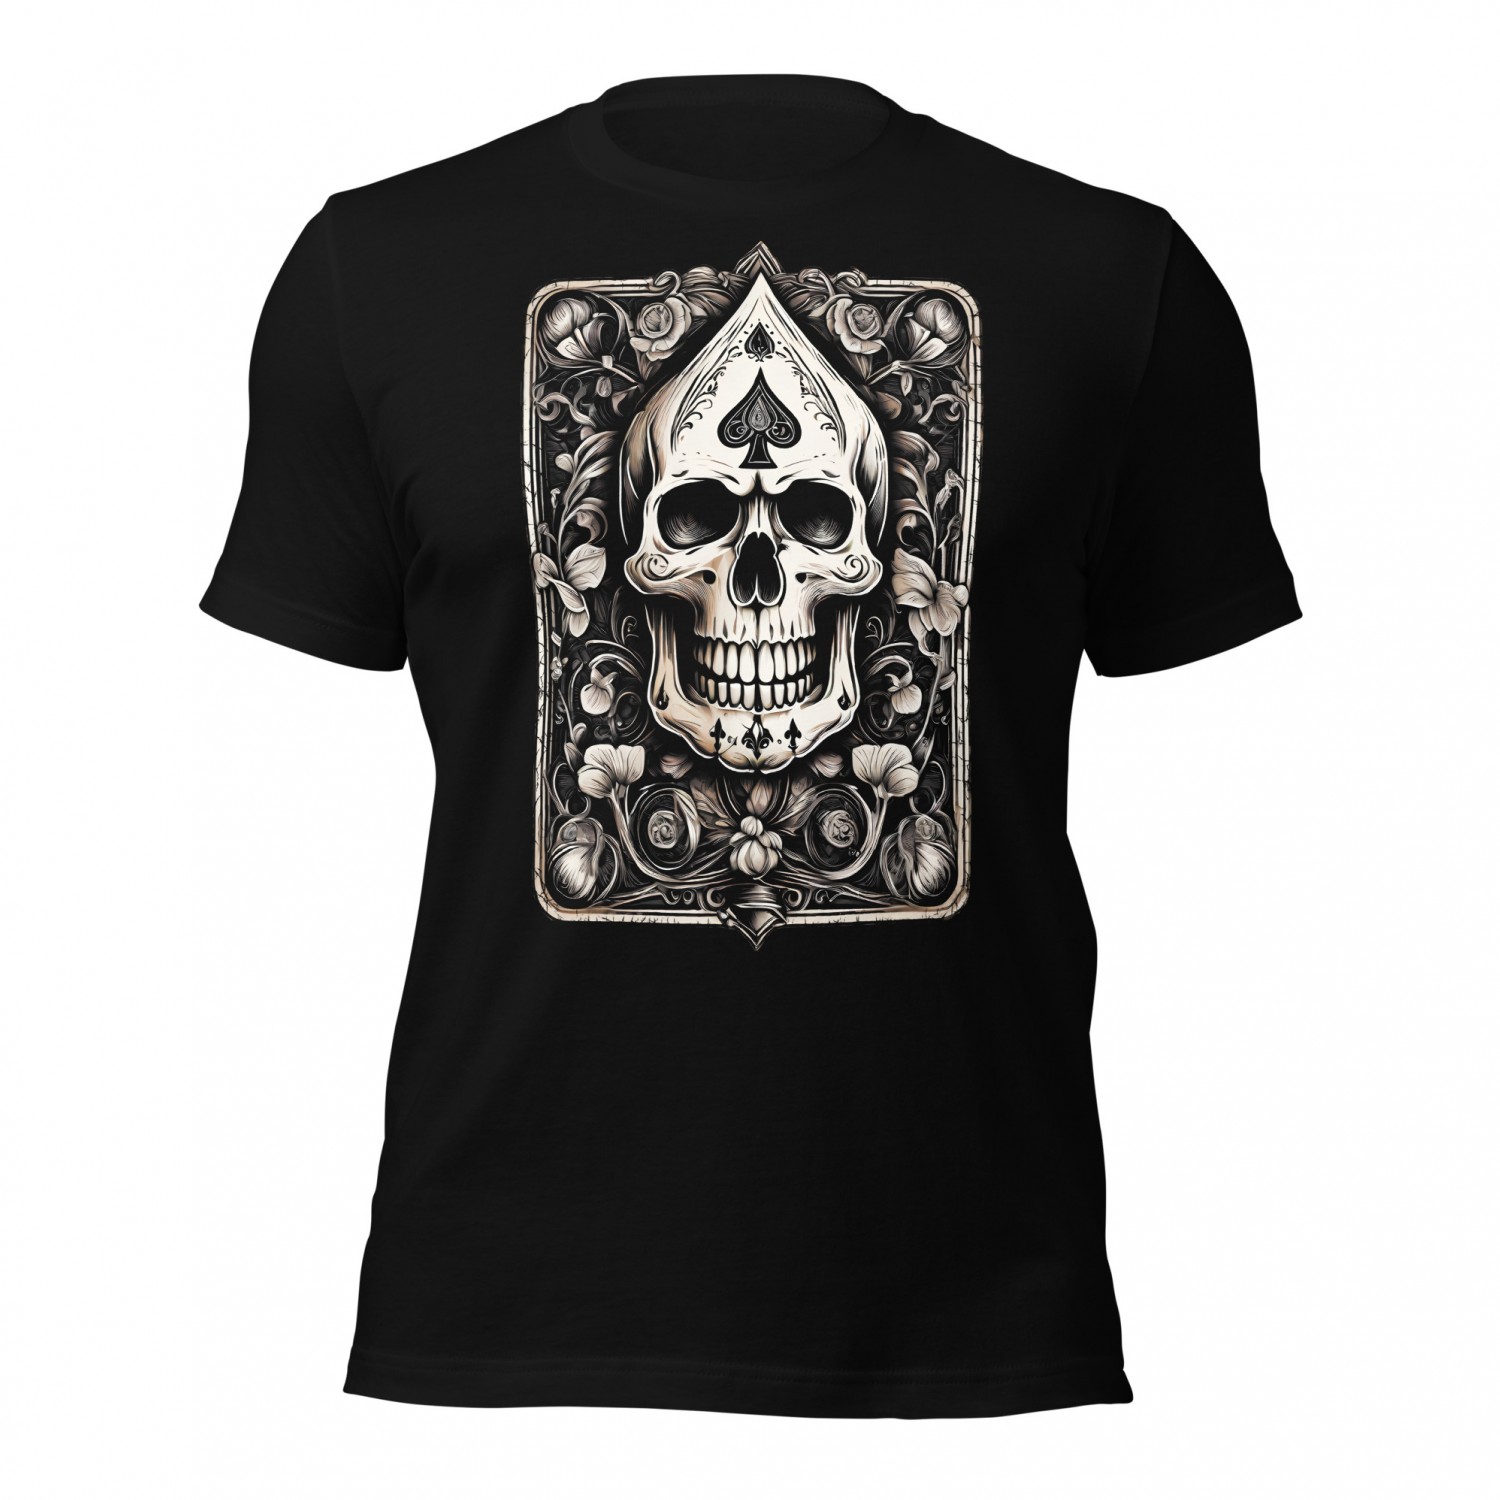 T-shirt with the Spades card